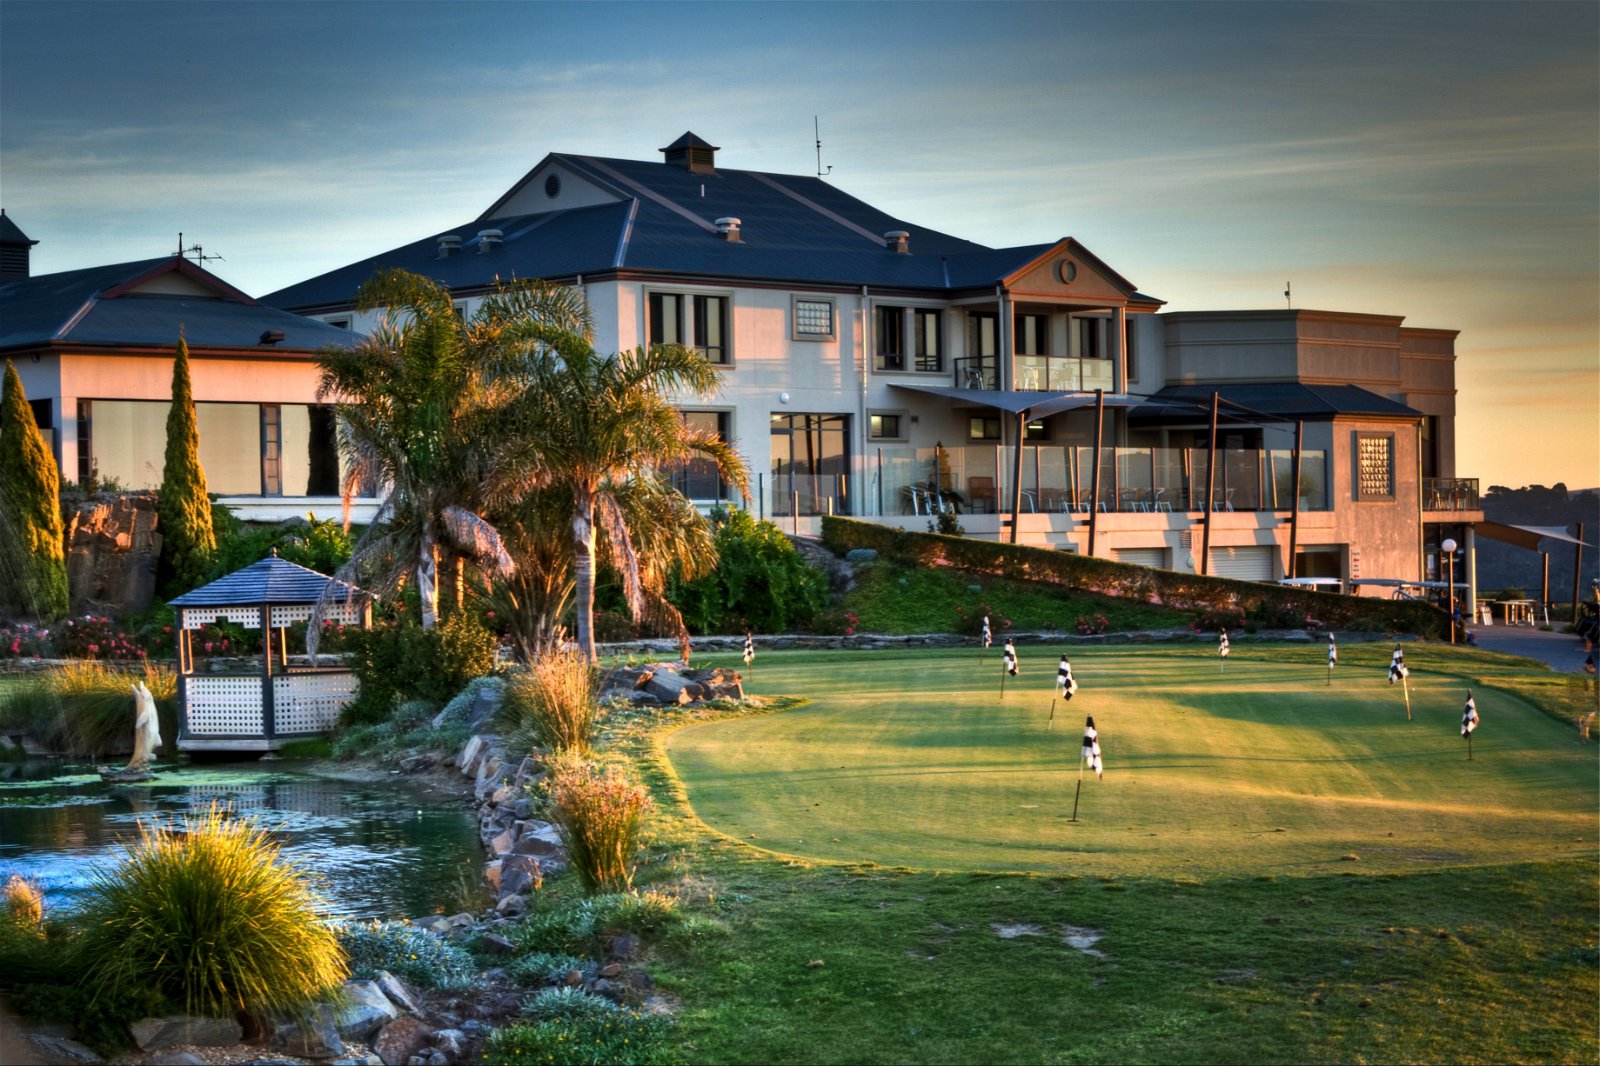 Baudins Restaurant at McCracken Country Club - Northern Rivers Accommodation